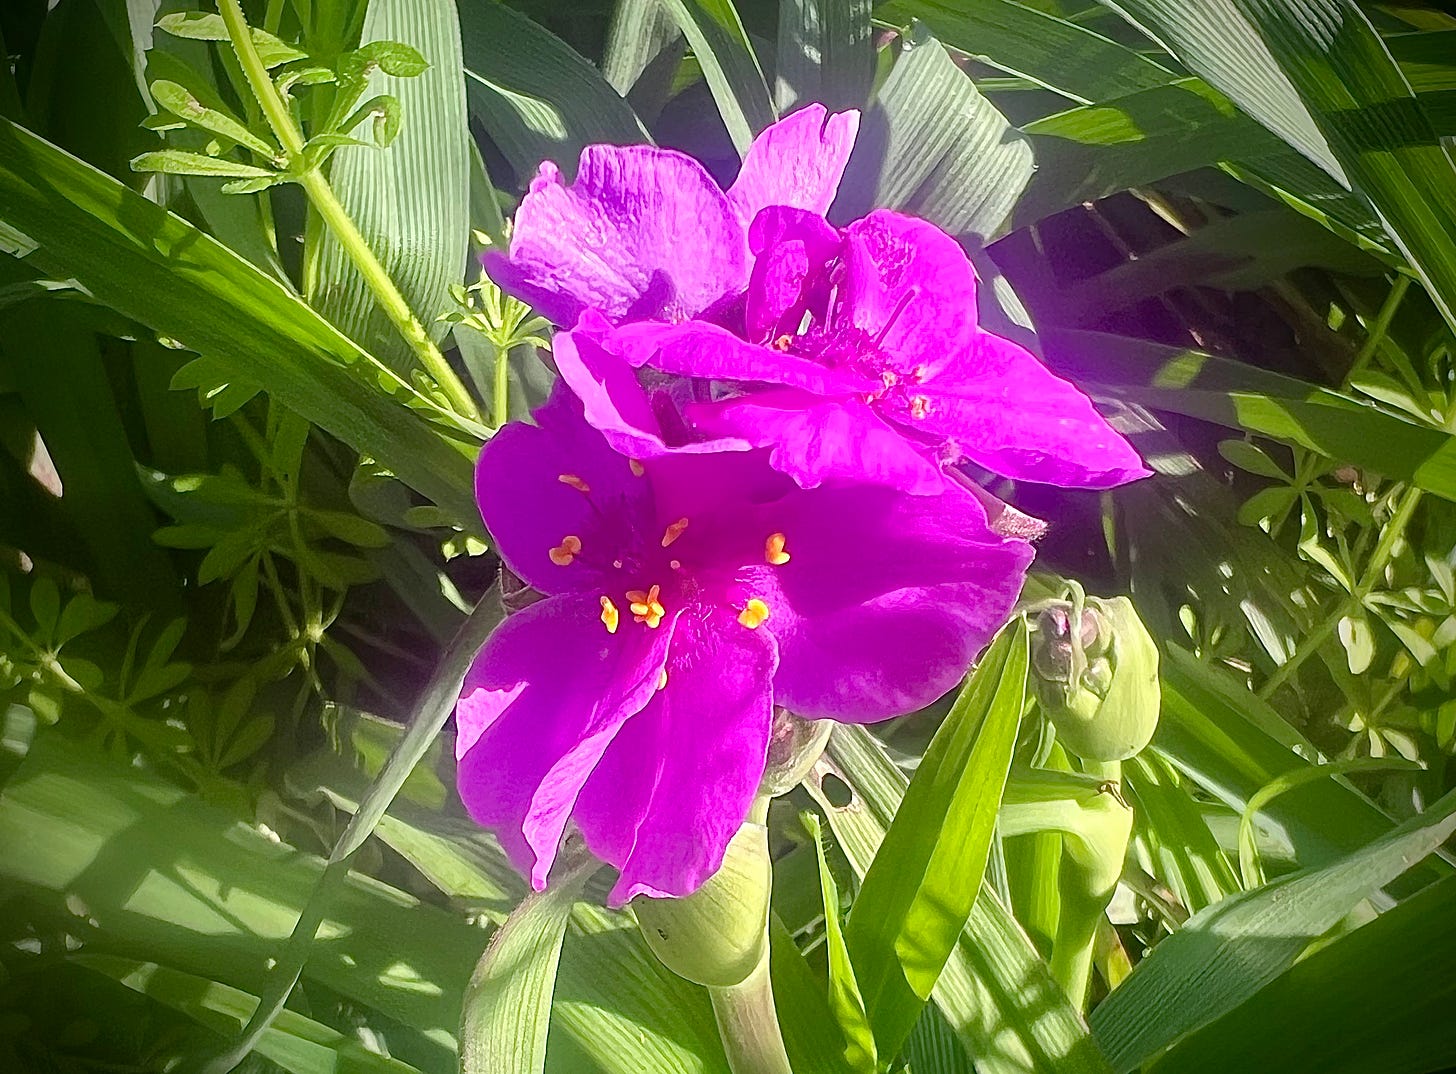 Spiderwort in bloom, with yellow pistils, purple petals, and deep green leaves